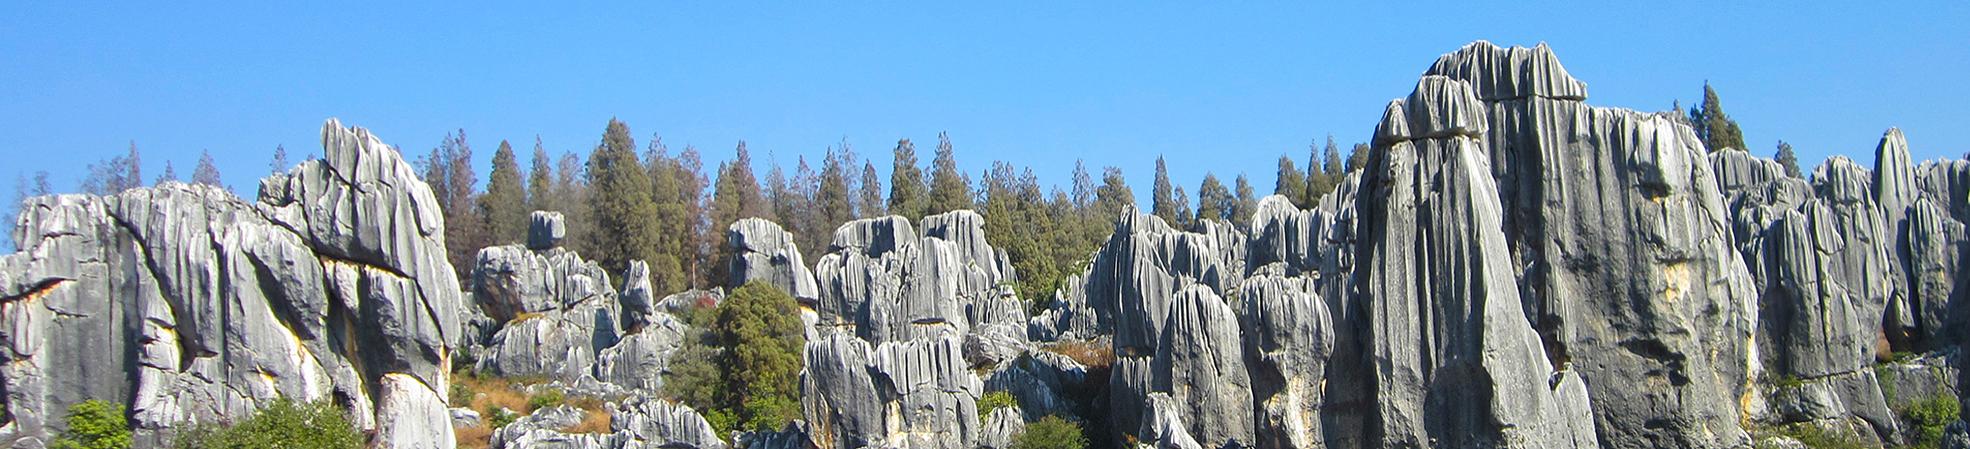 Stone Forest in Kunming